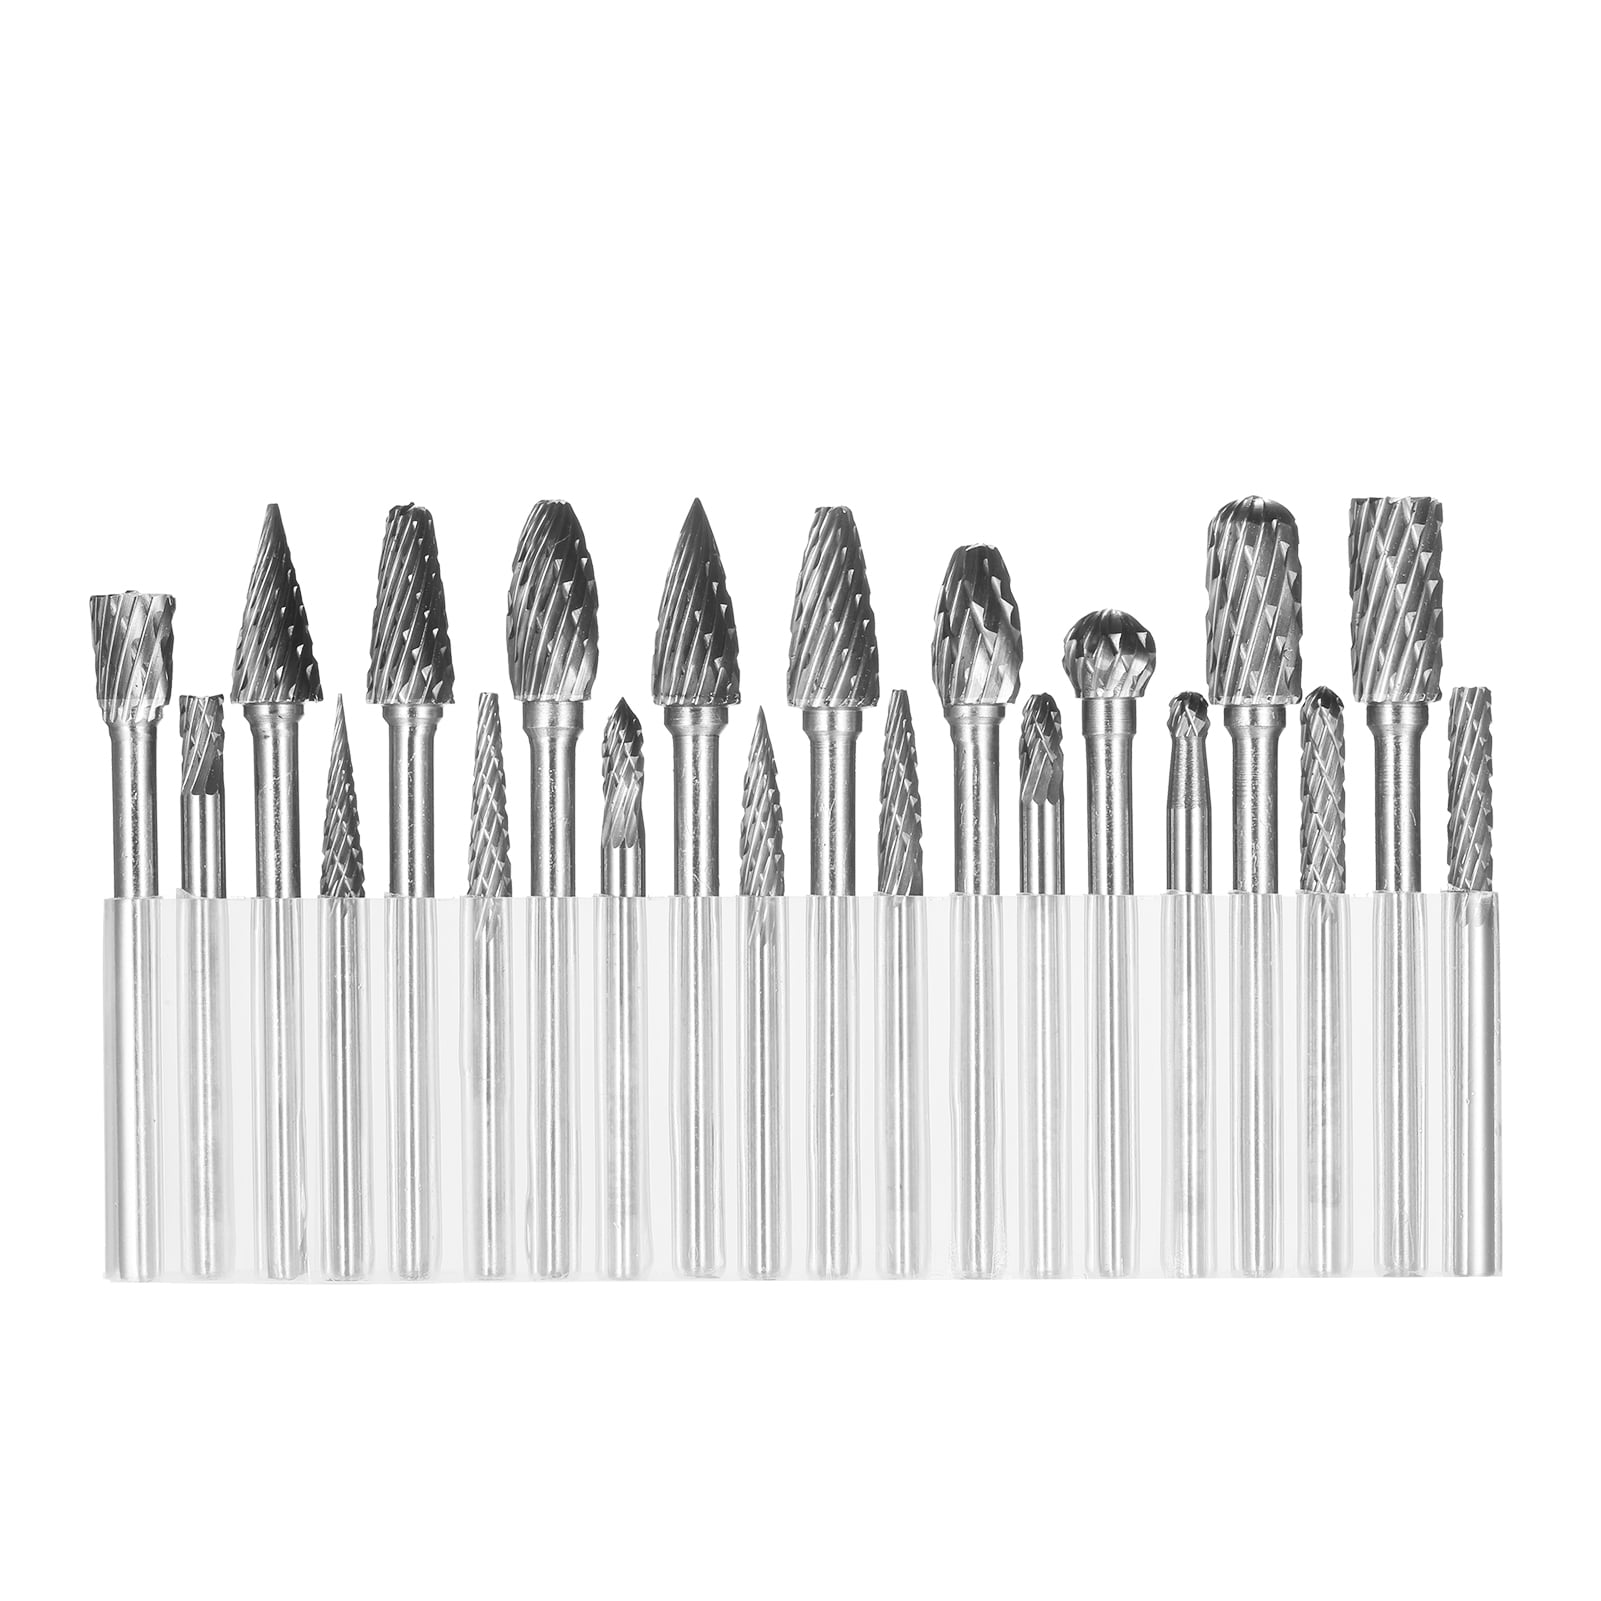 6 Mm m Shank and 1/4 Inch Double Cut Titanium Carbide Rotary Burr Set -10 Pieces 1/8 Inch Head Sizetungsten Steel,for Wood 